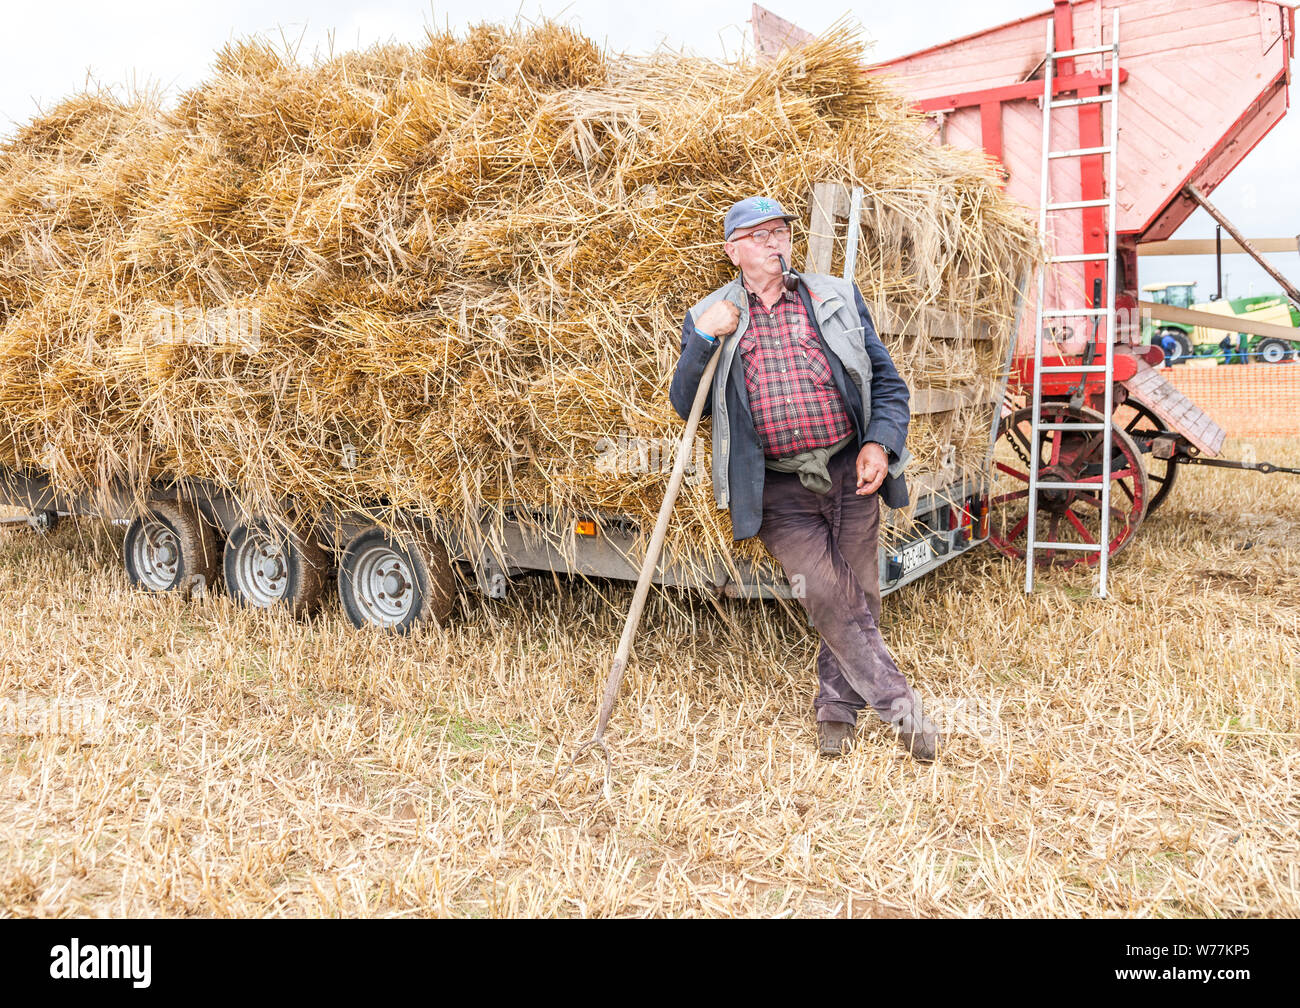 Sandycove Ballinspittle, Cork, Ireland. 05th August, 2019. Jim Footman, Ballinadee taking it easy at the De Courcey Harvest Day  that was held over the August Bank Holiday weekend at Sandycove, Ballinspittle, Co. Cork, Ireland. - Credit;  David Creedon / Alamy Live News Stock Photo